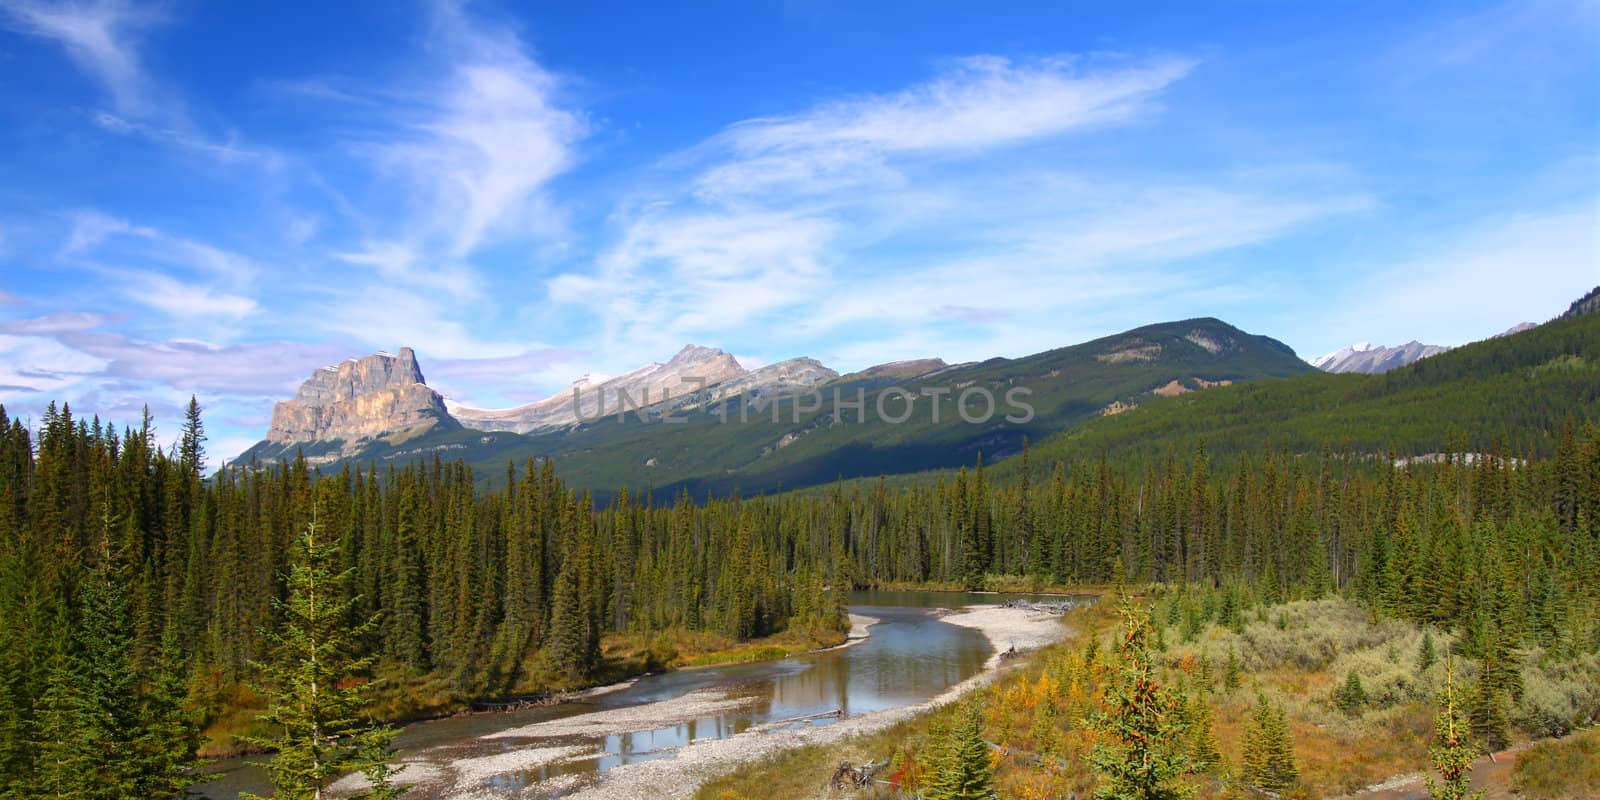 Bow River with Castle Mountain seen in the background at Banff National Park - Canada.